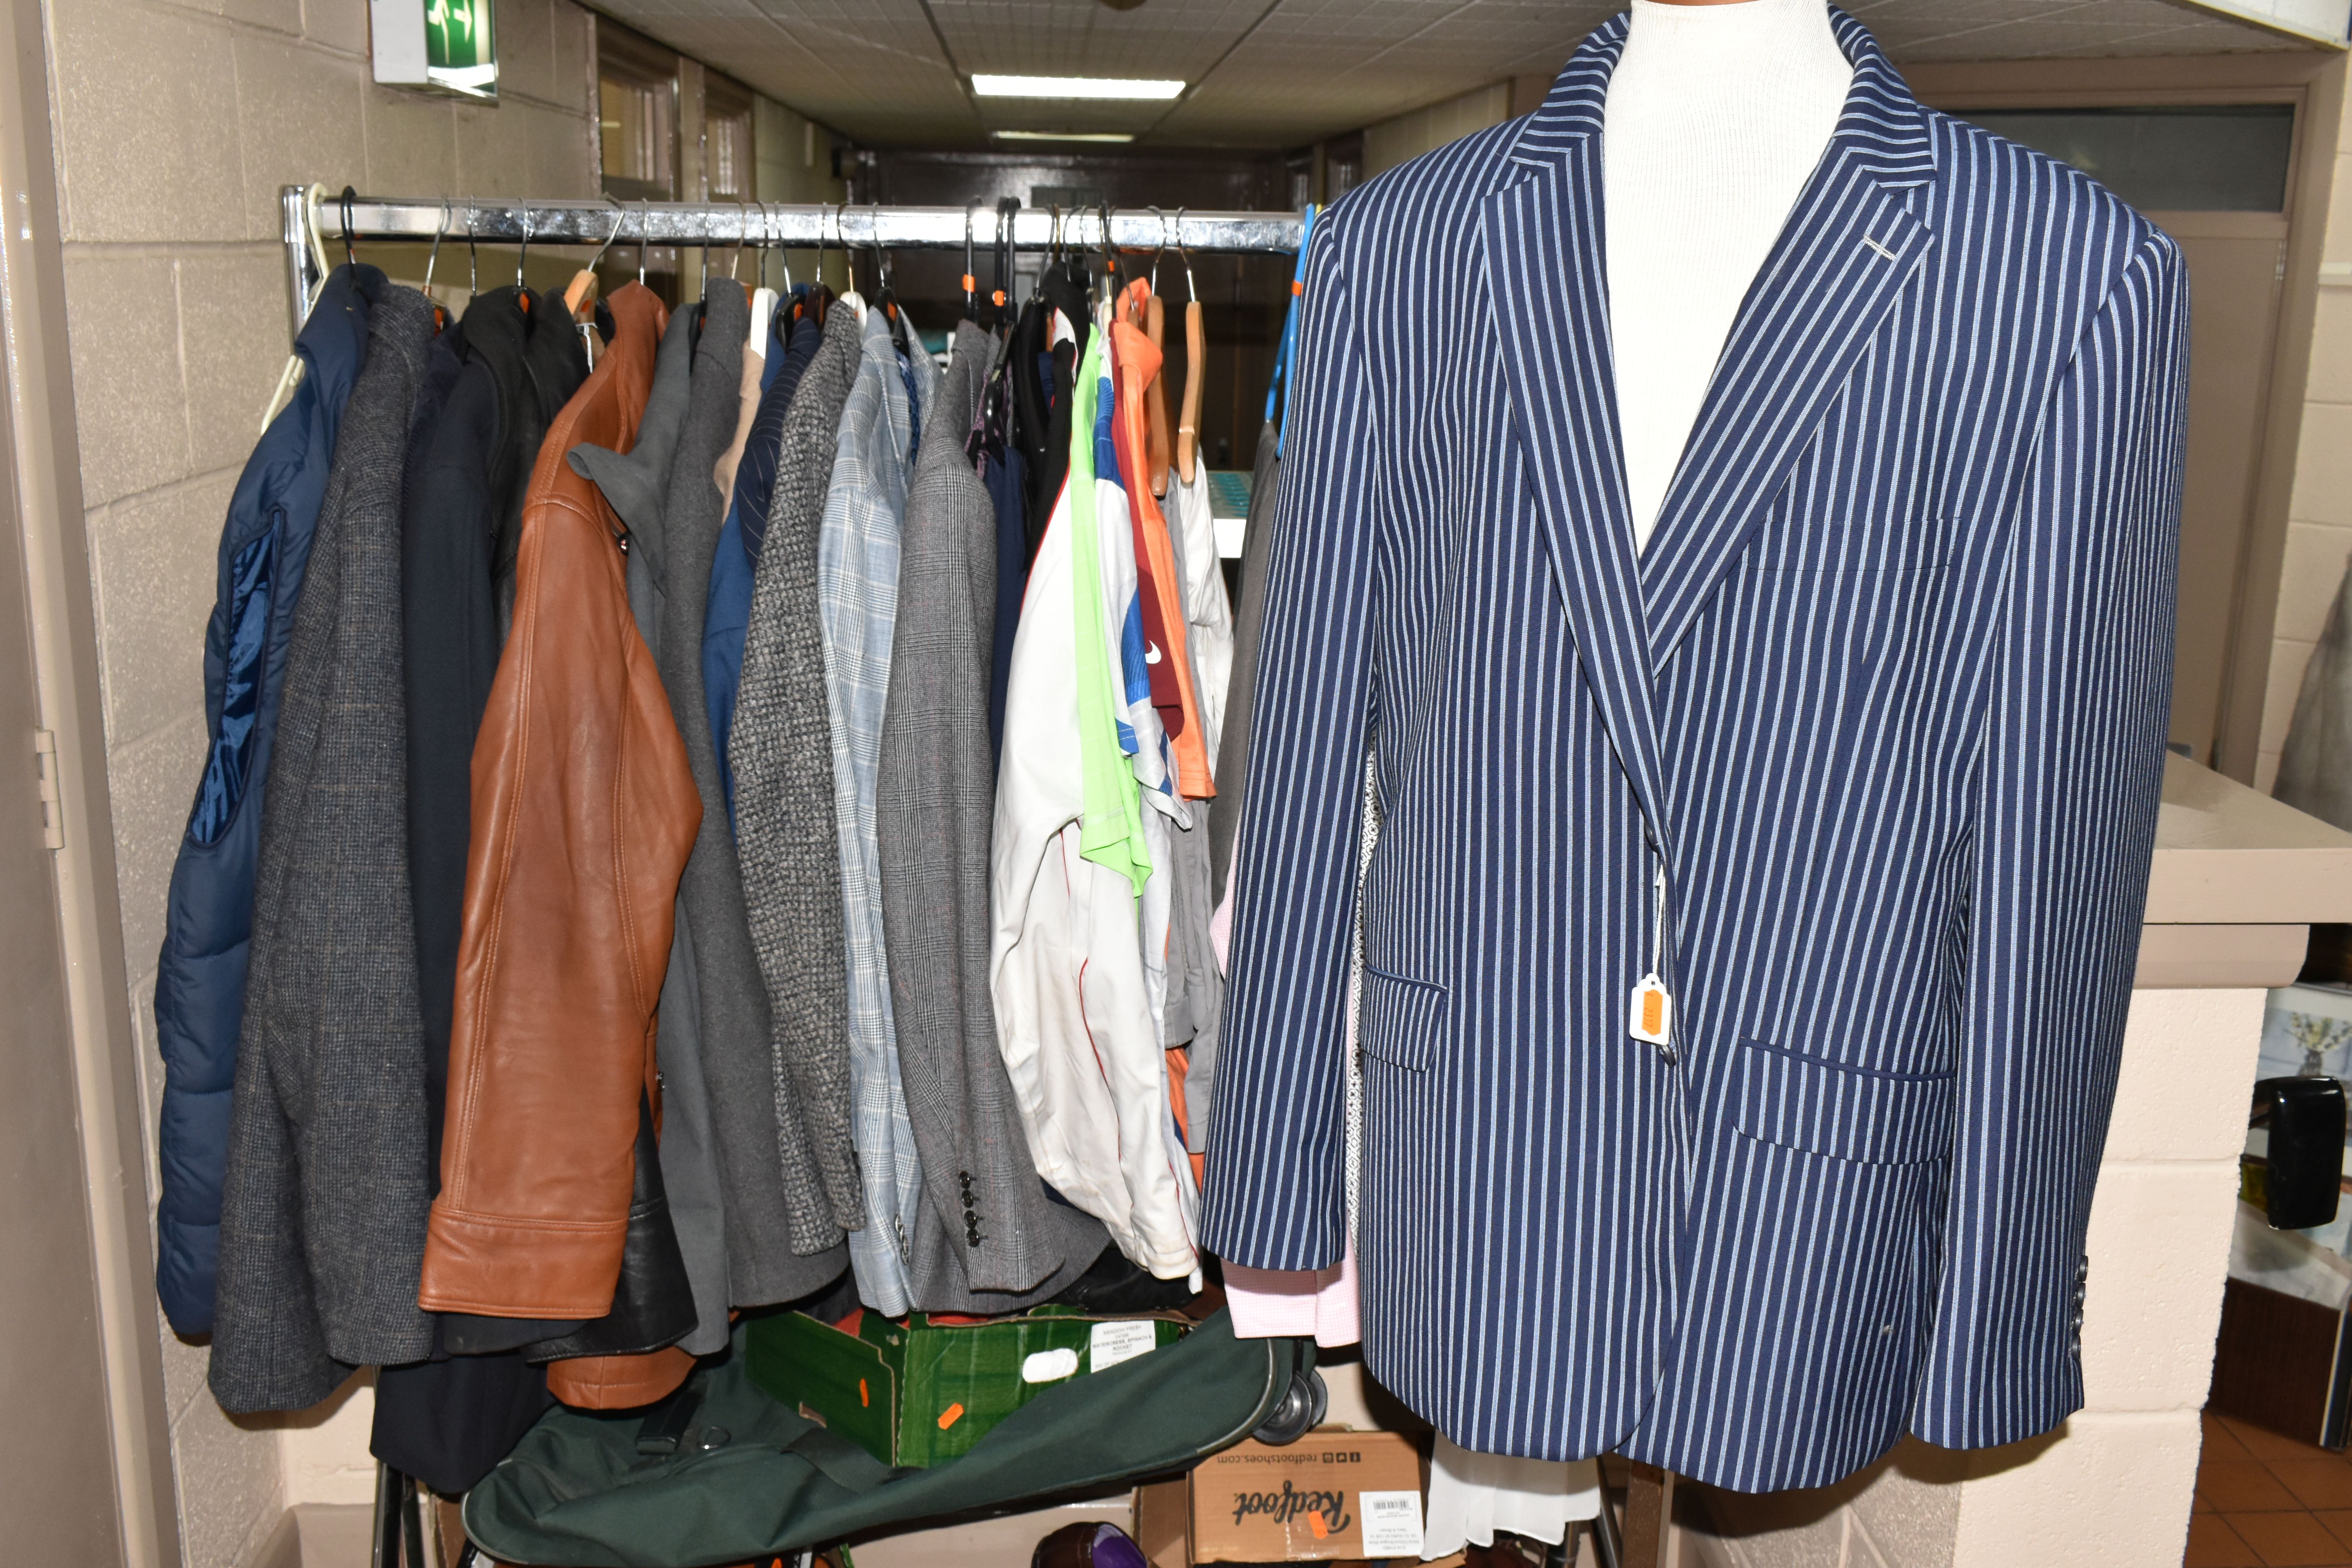 A QUANTITY OF GENTLEMEN'S CLOTHING AND ACCESSORIES, to include a Gurteen striped blazer, UK size